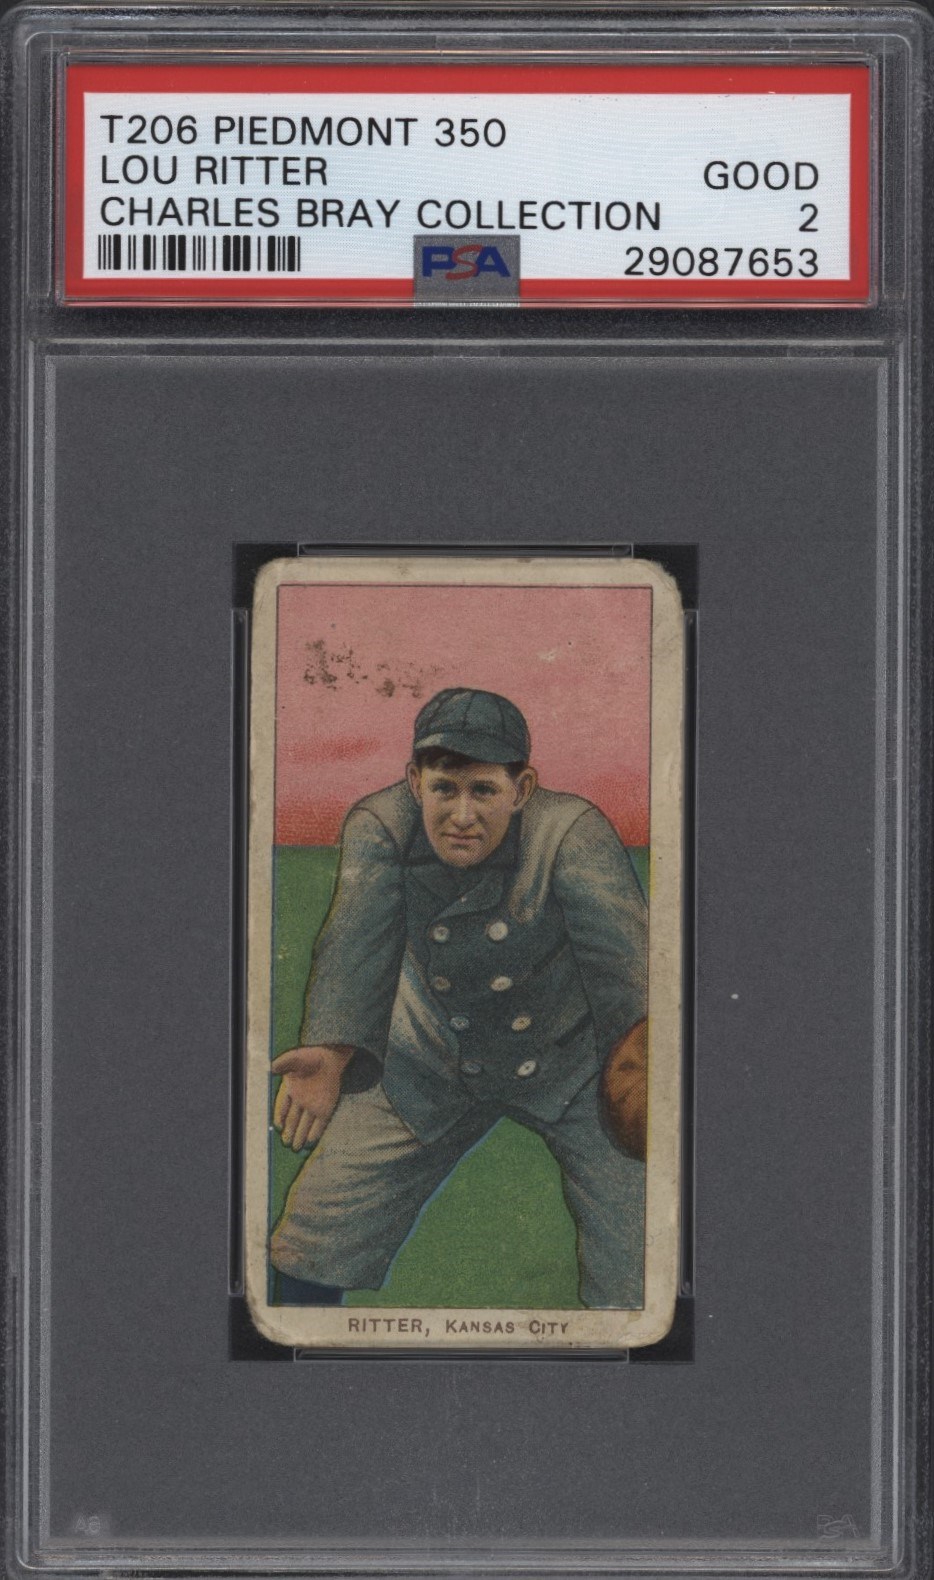 - T206 Piedmont 350 Lou Ritter PSA 2 From the Charles Bray Collection